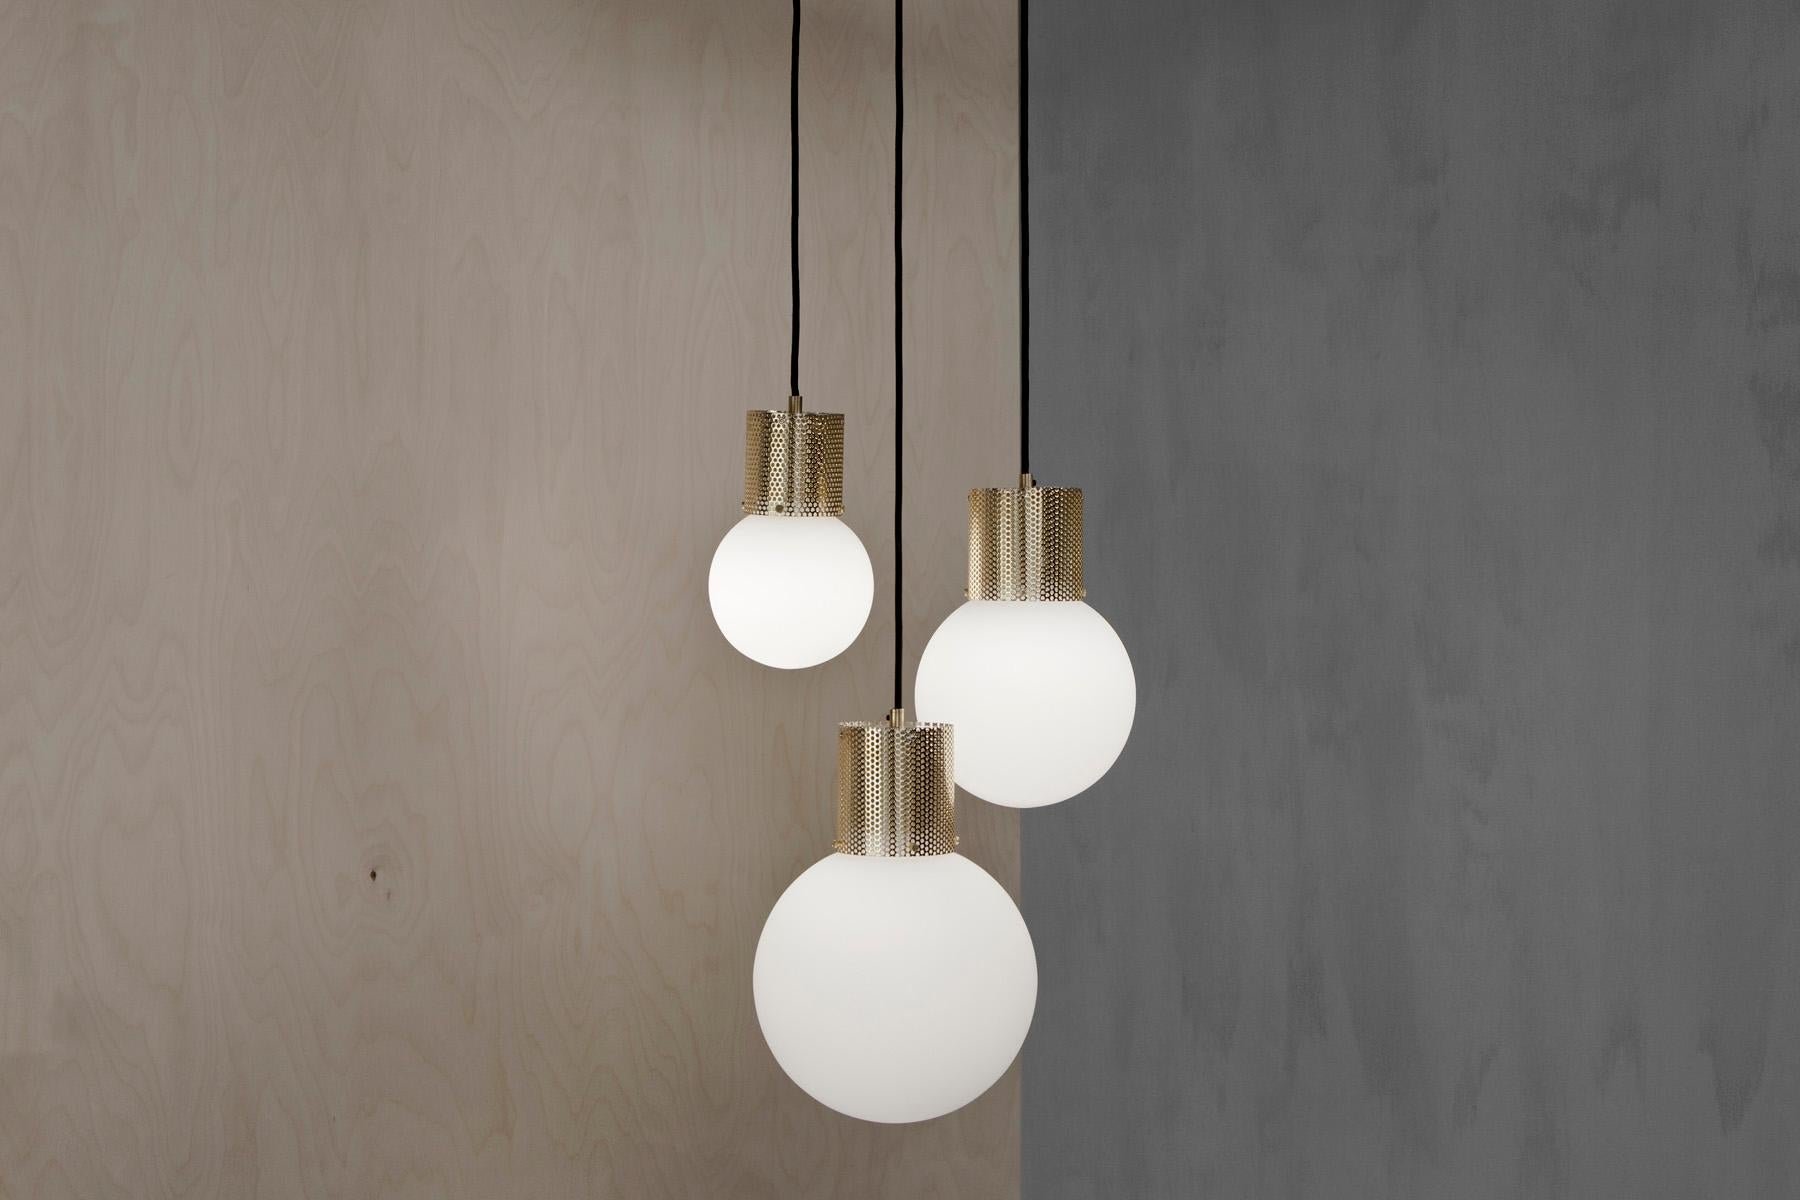 Modern Perf Pendant Light Medium Brass Perforated Tube, Glass Round Orb Shade For Sale